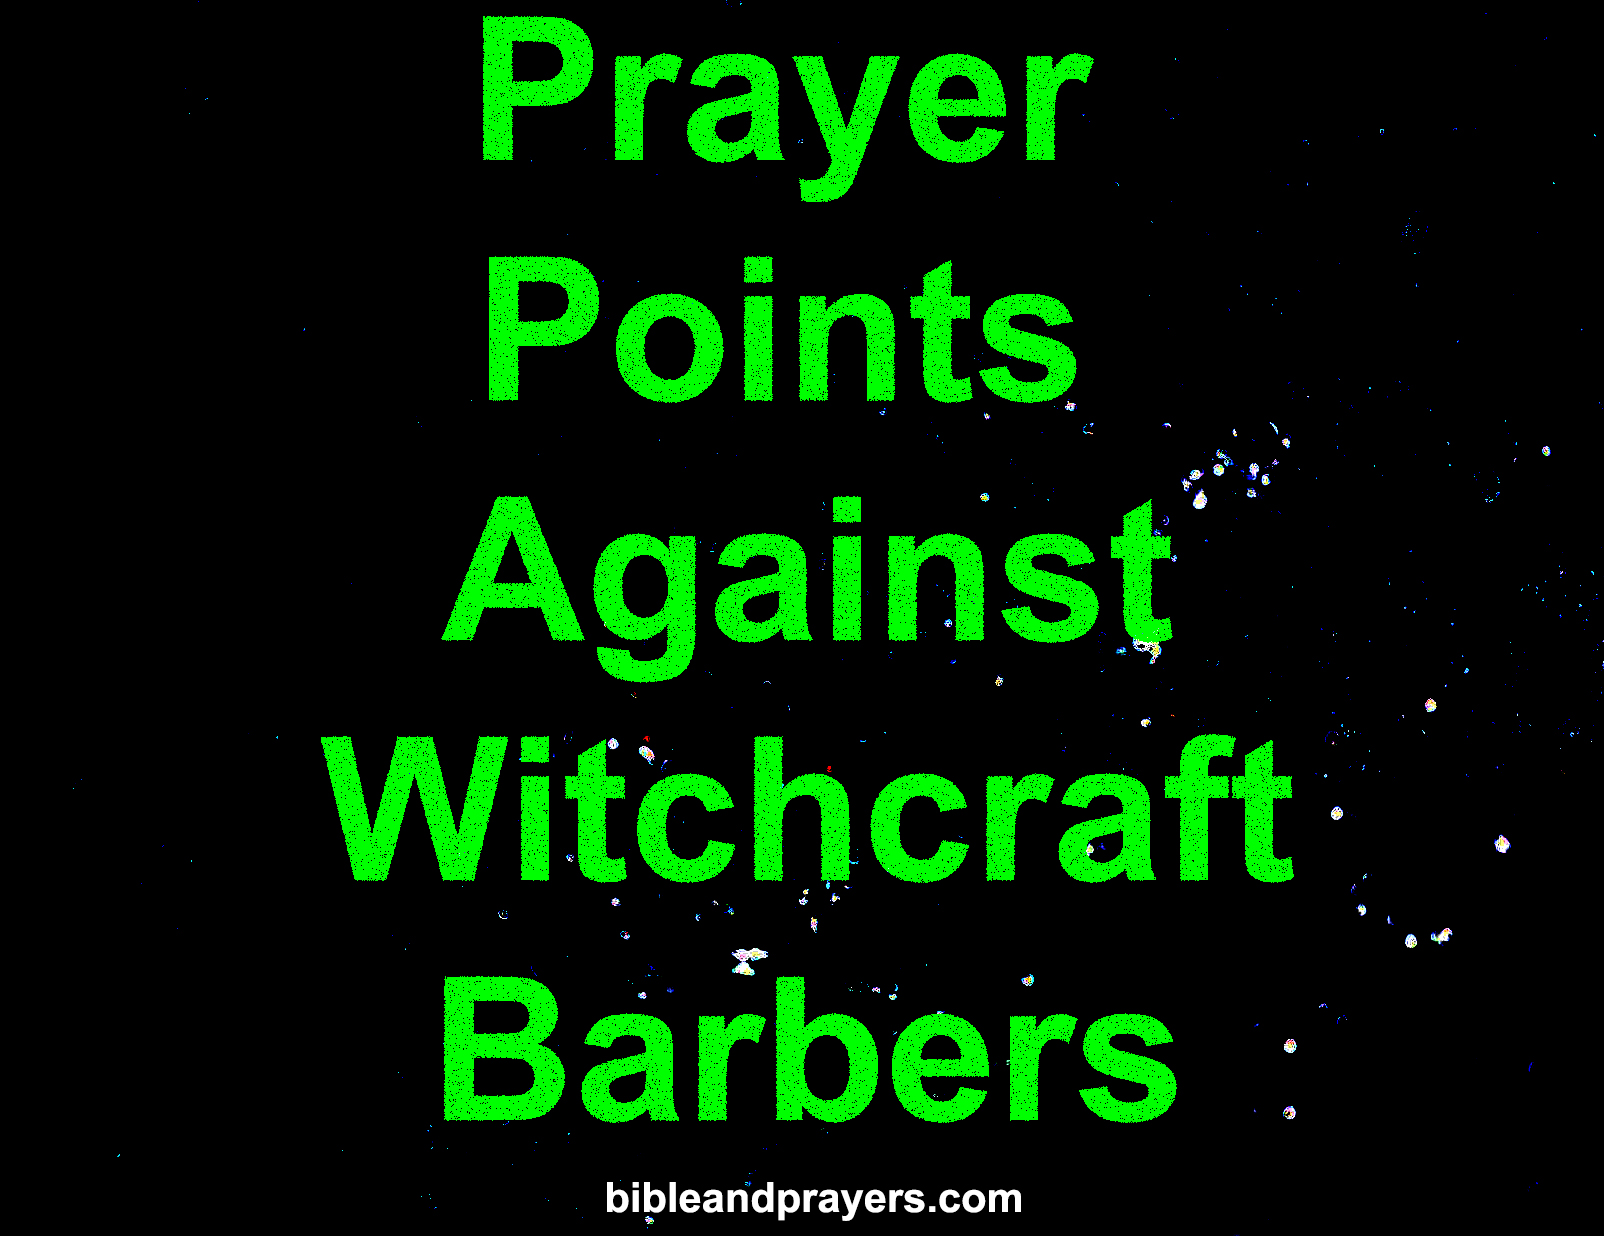 Prayer Points Against Witchcraft Barbers